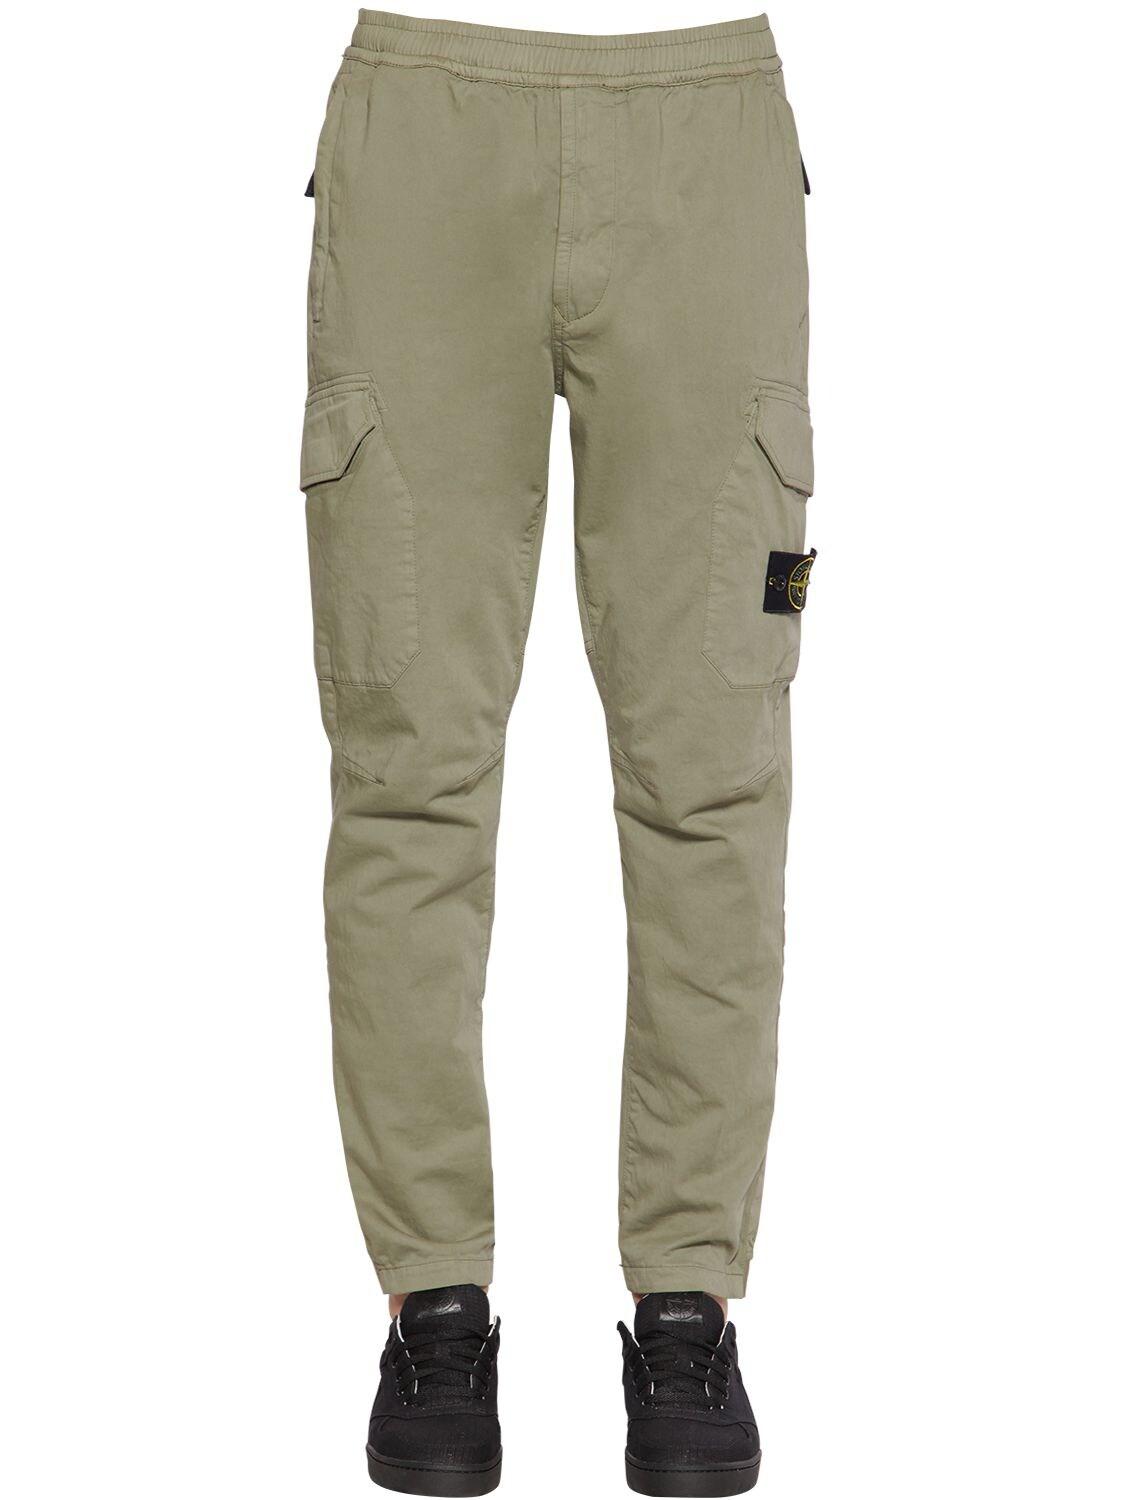 Stone Island Cotton Blend Cargo Jogger Pants in Green for Men - Lyst